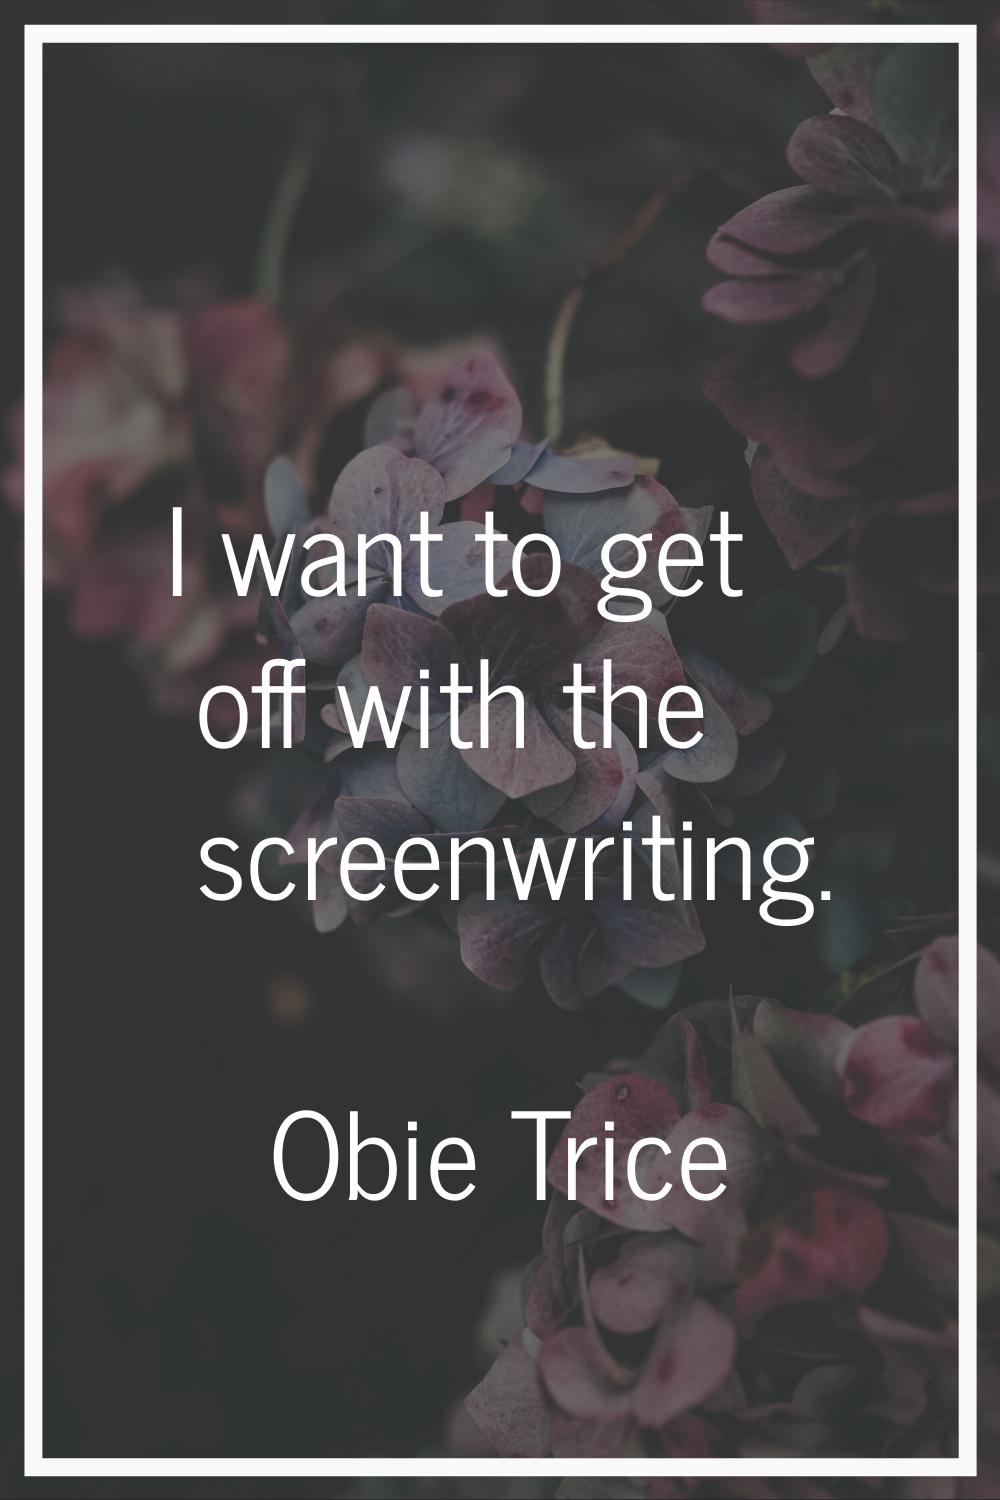 I want to get off with the screenwriting.